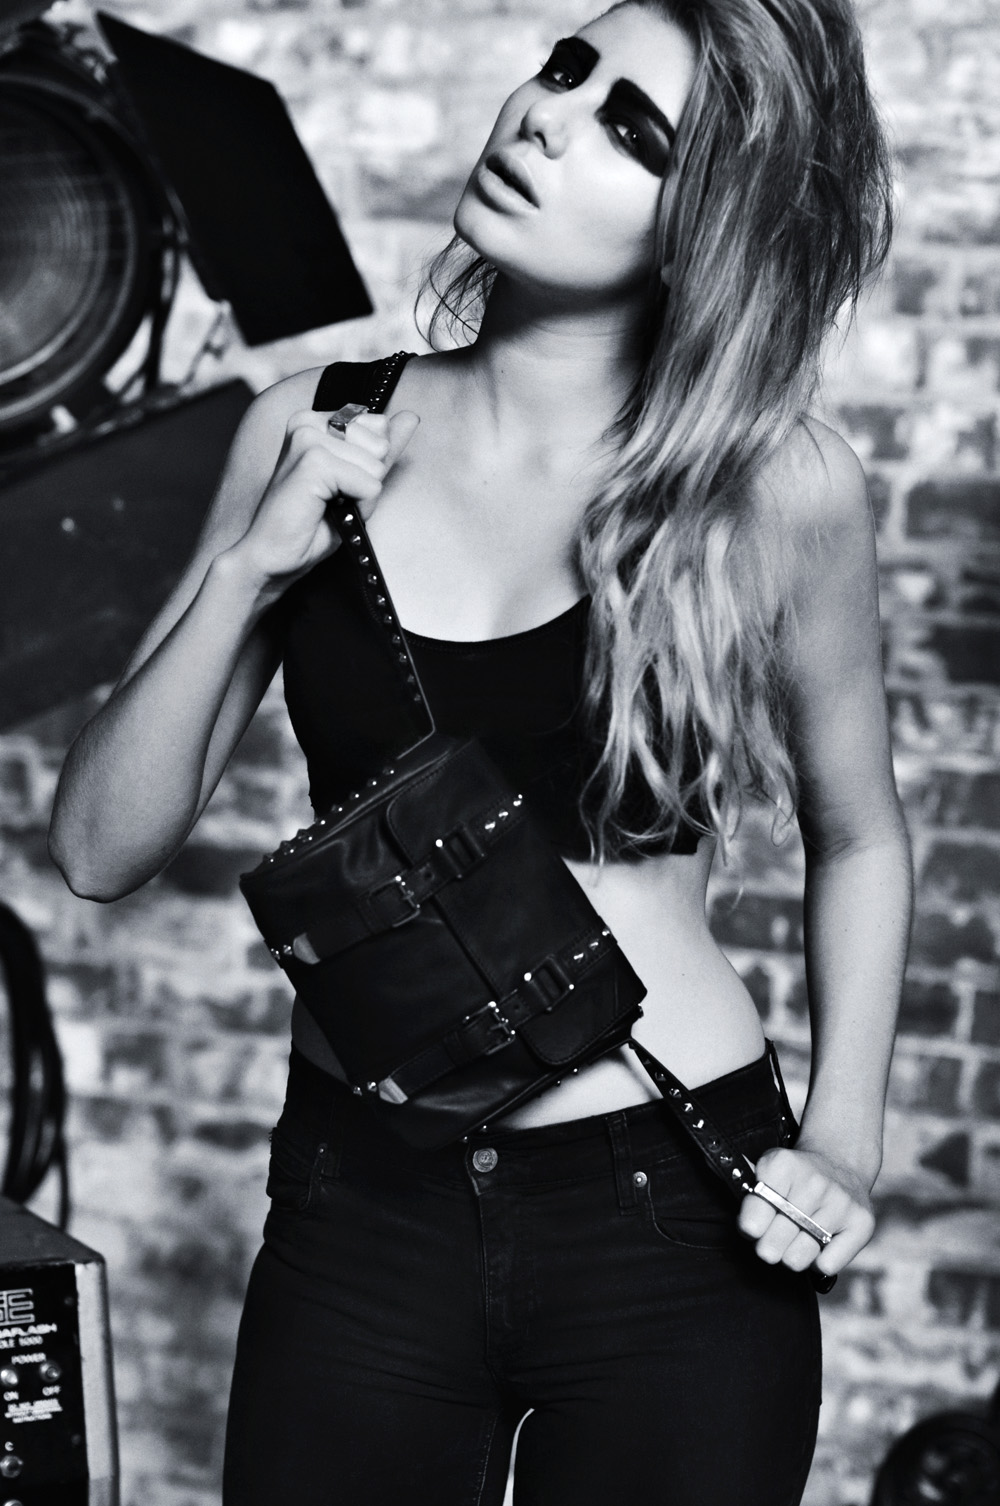 Sydney fashion model photographed with small satchel in black and white. Biker fashion inspired handbag branding campaign. Photography by Kent Johnson.